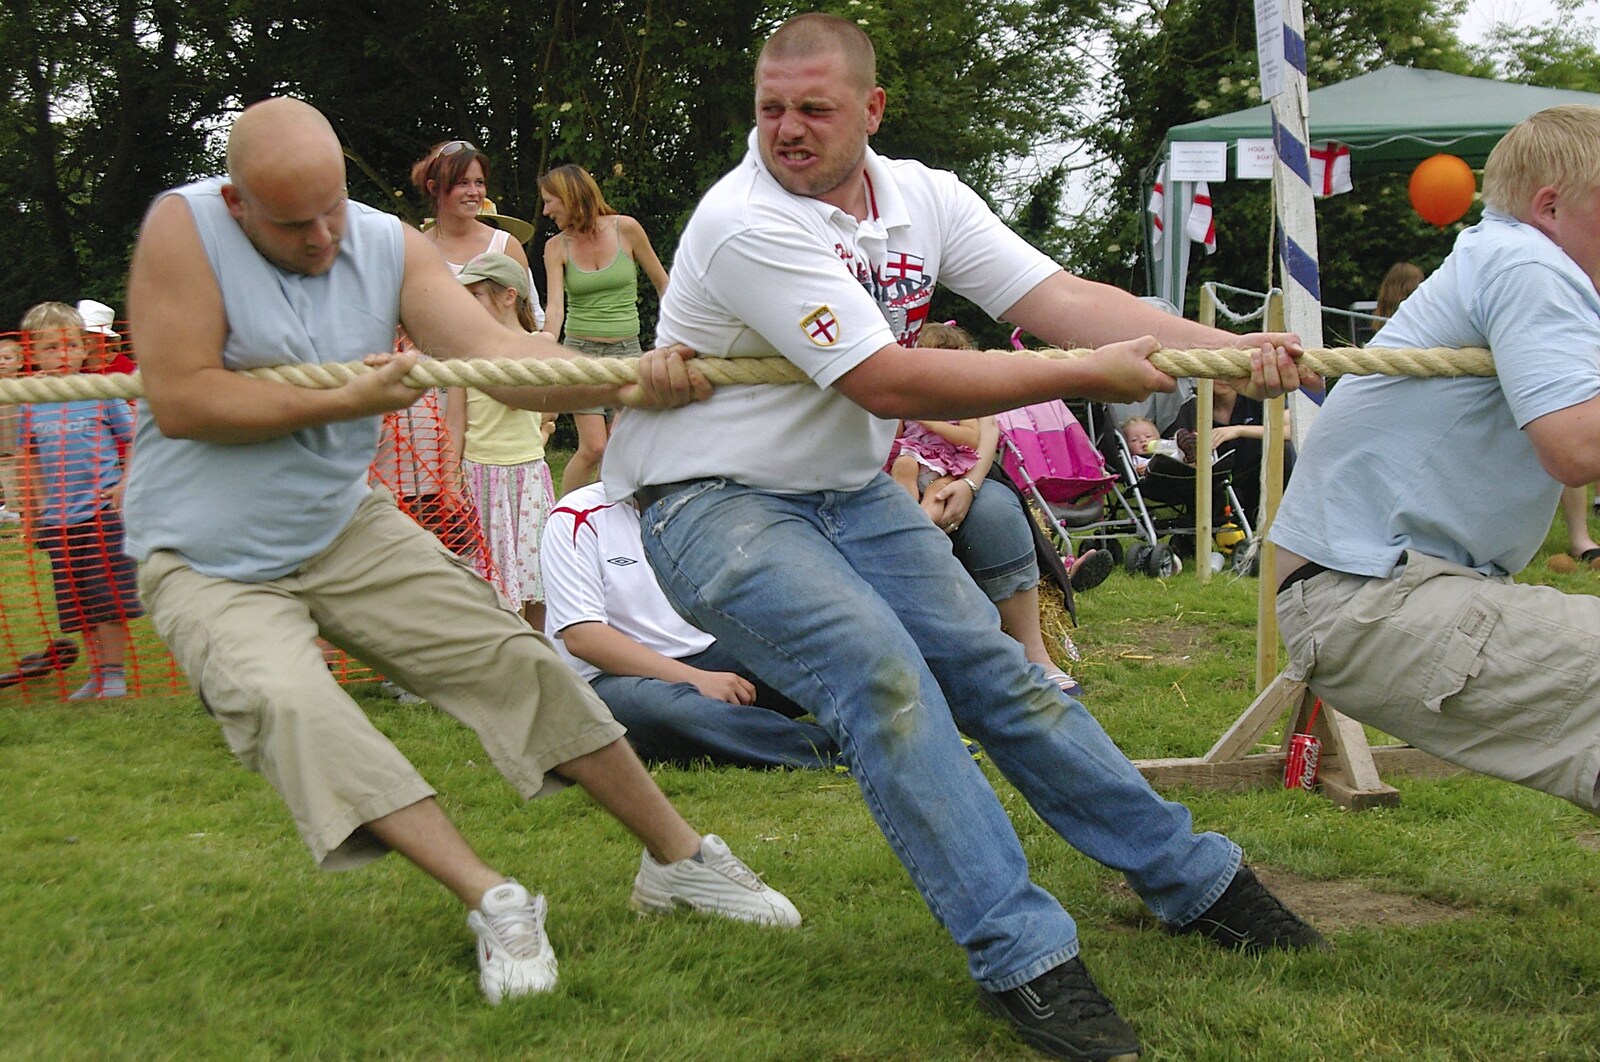 The tug of war gets intense from The Village Fête, Yaxley, Suffolk - 18th June 2006